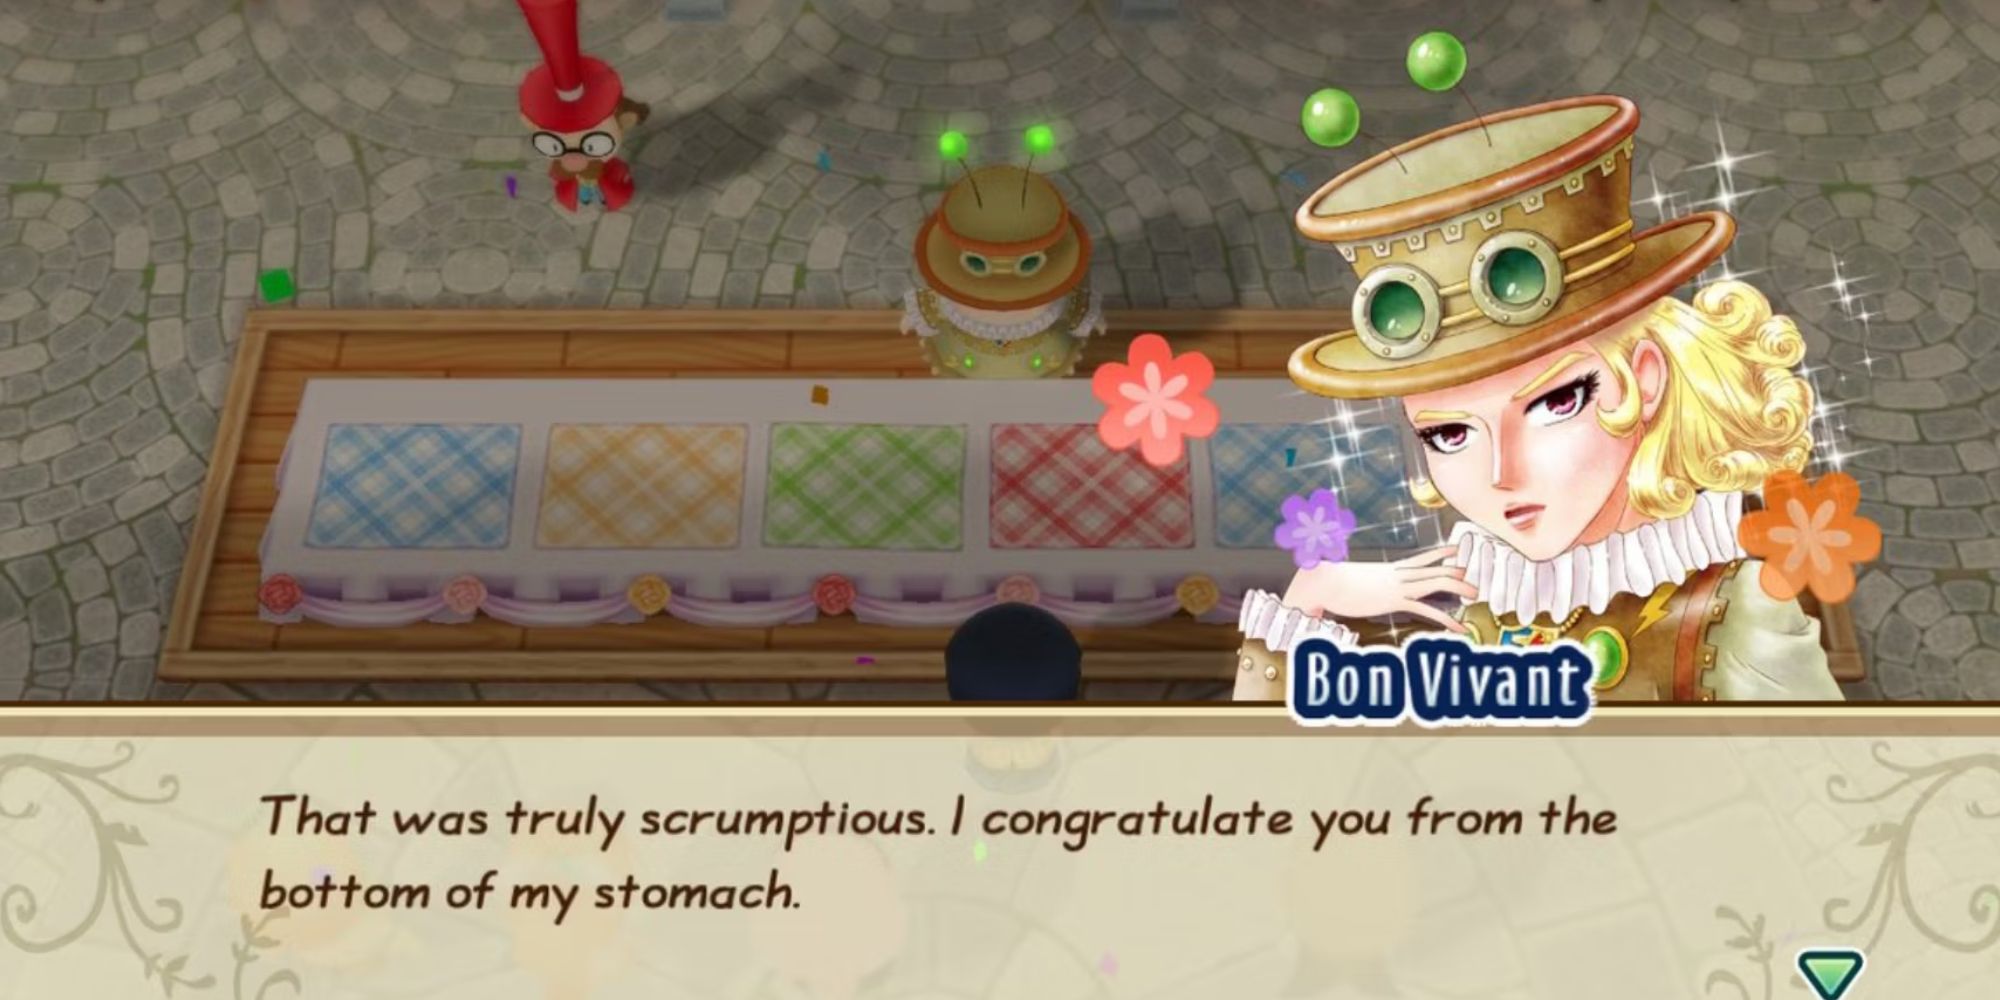 Bon Vivant in Story of Seasons Friends of Mineral Town